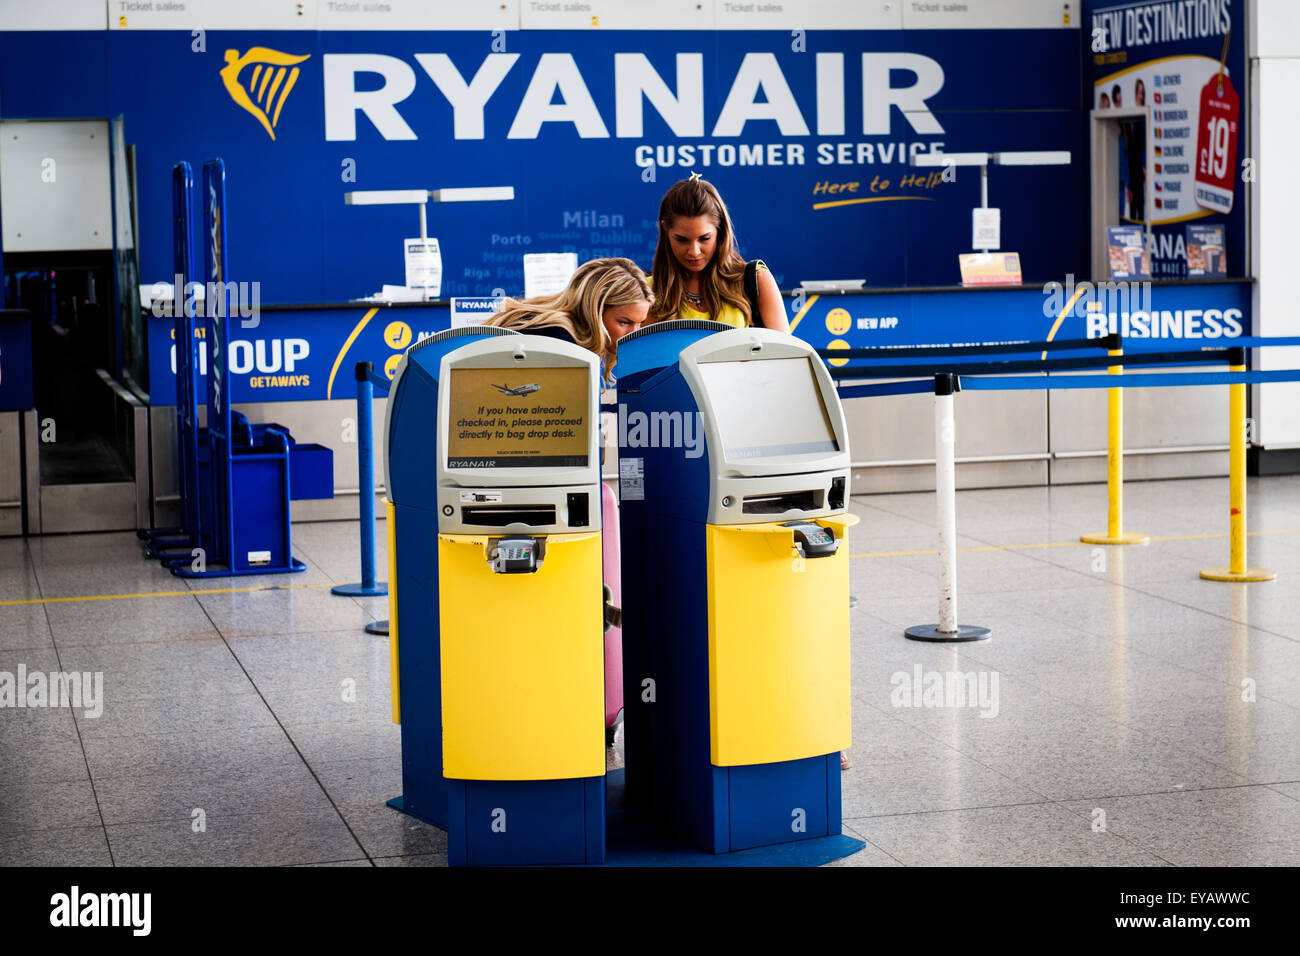 Passengers using Automatic Check In machines next to Ryanair Customer Service at Stansted airport, uk Stock Photo